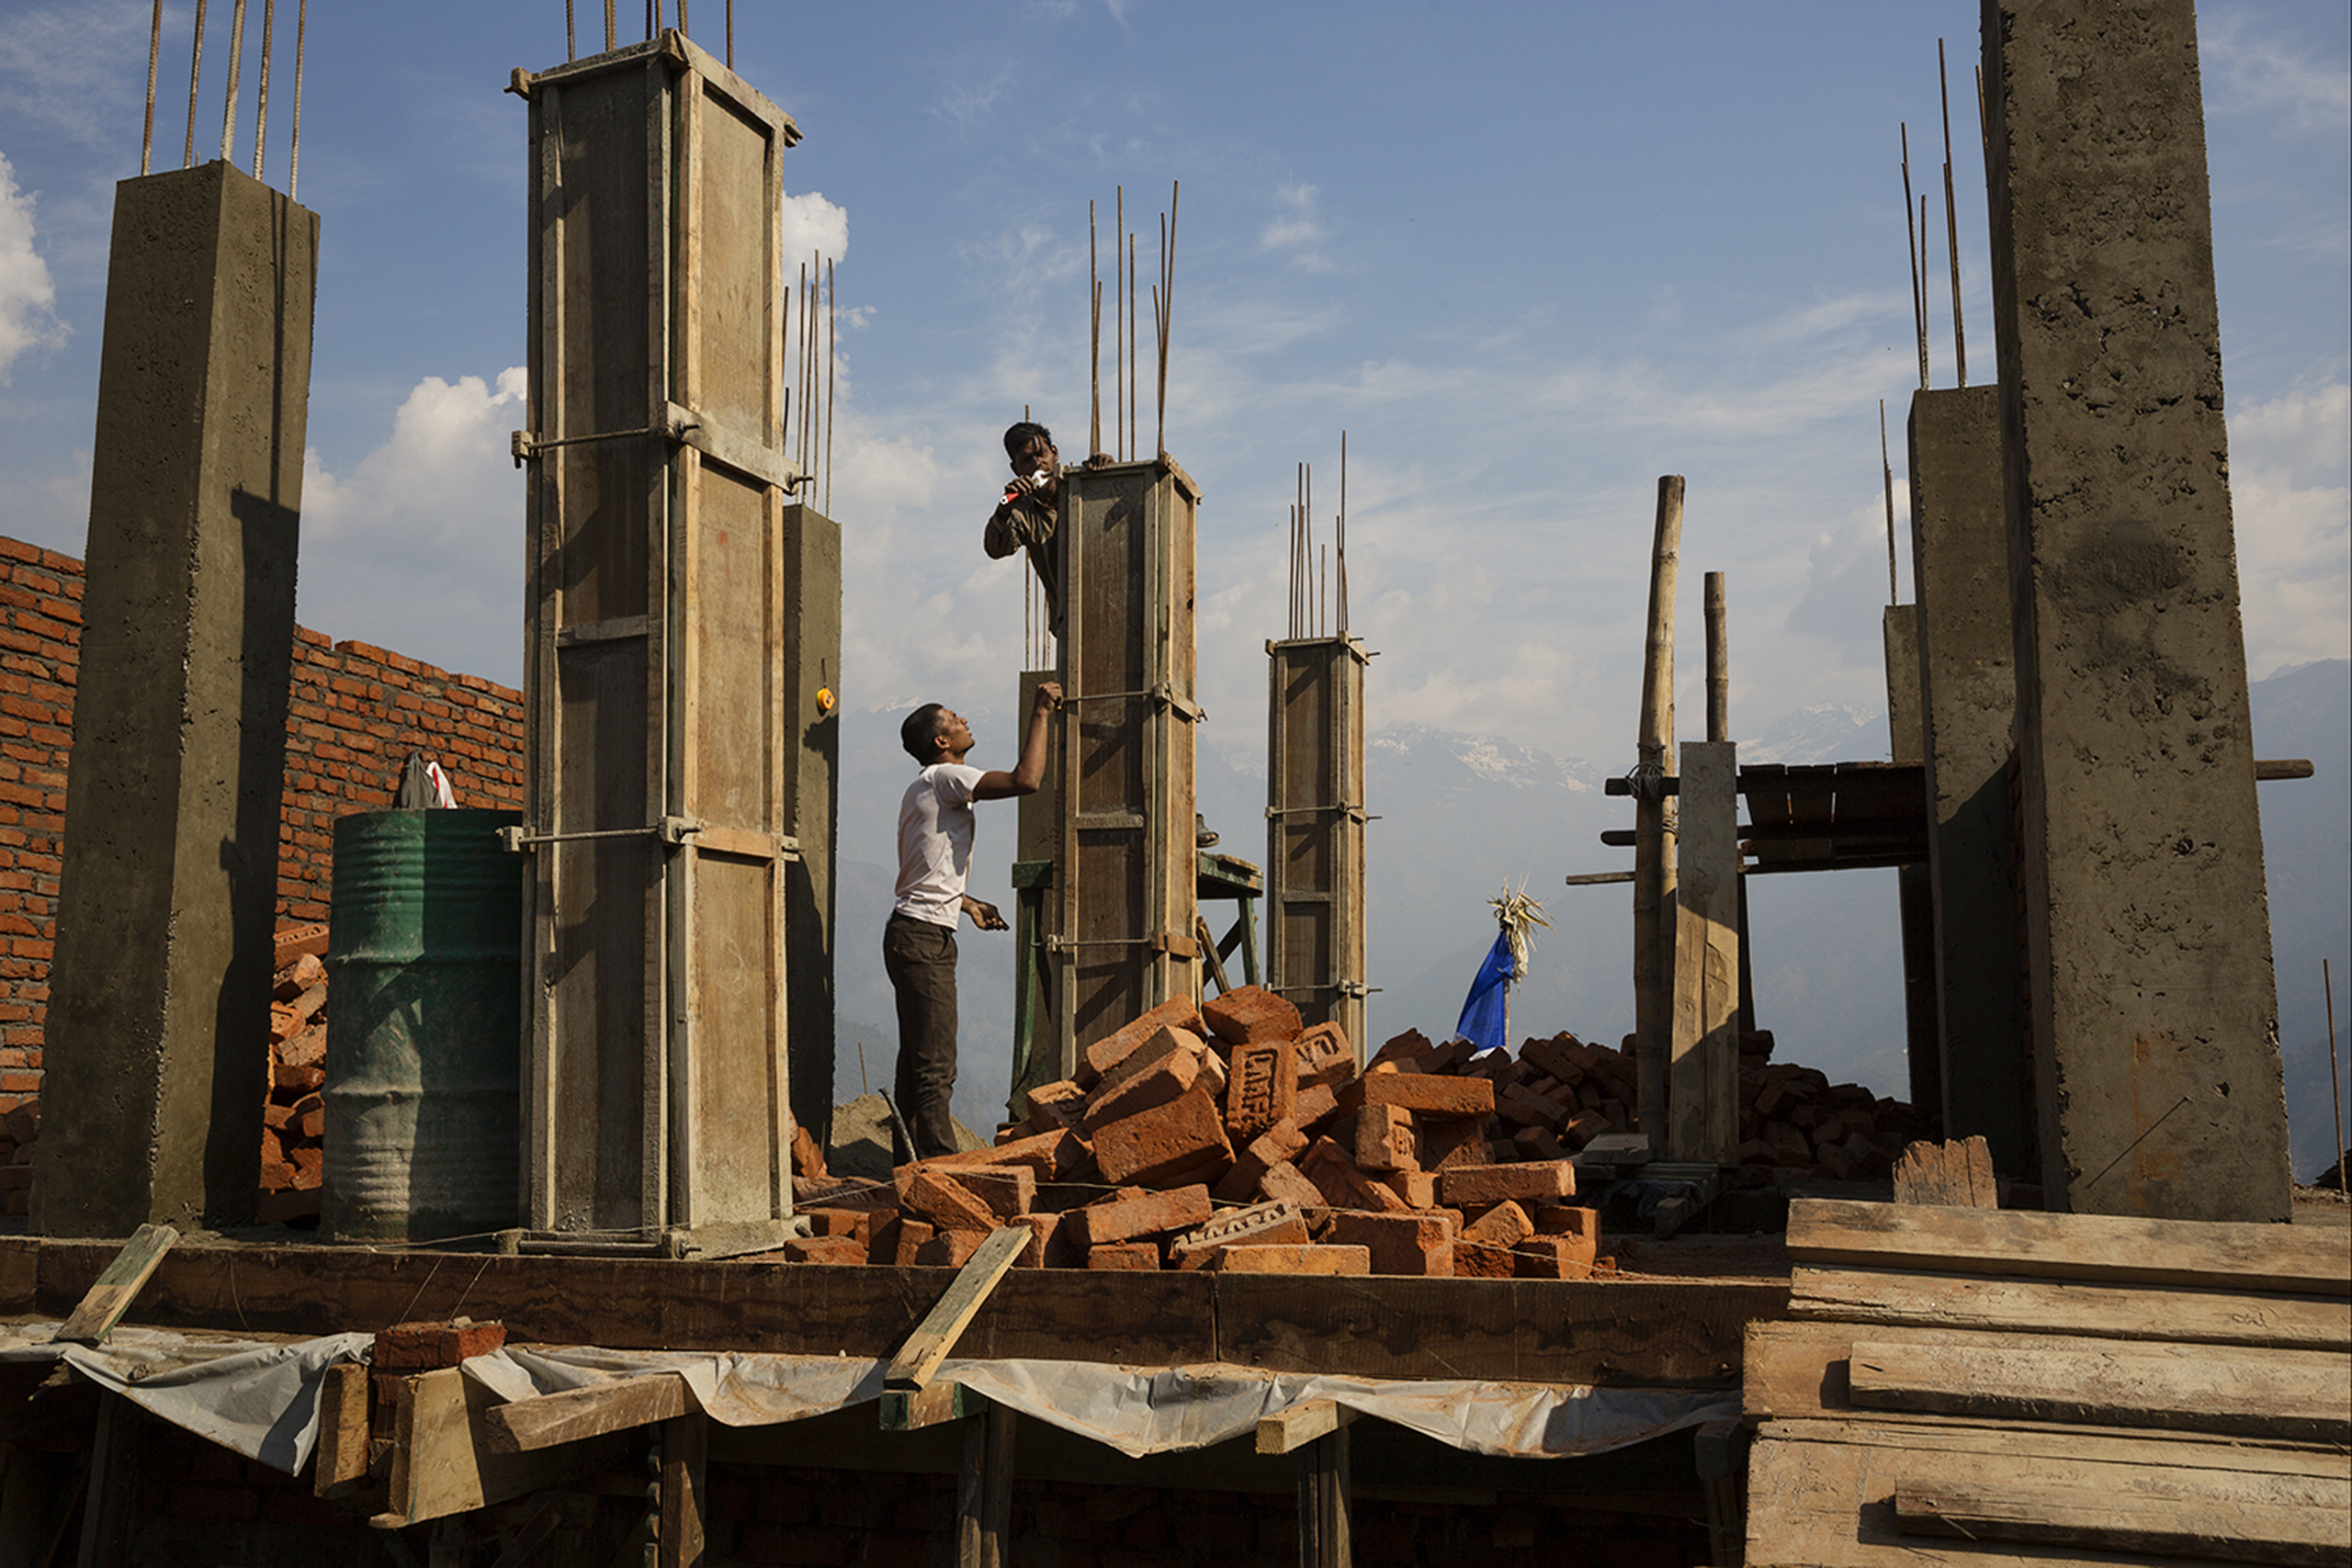 Villagers rebuilding houses on April 7, 2016, in Barpak, in Gorkha district, Nepal, at the epicenter of the 2015 earthquakes, which were the worst natural disaster to befall Nepal in more than eight decades (James Nachtwey for TIME)